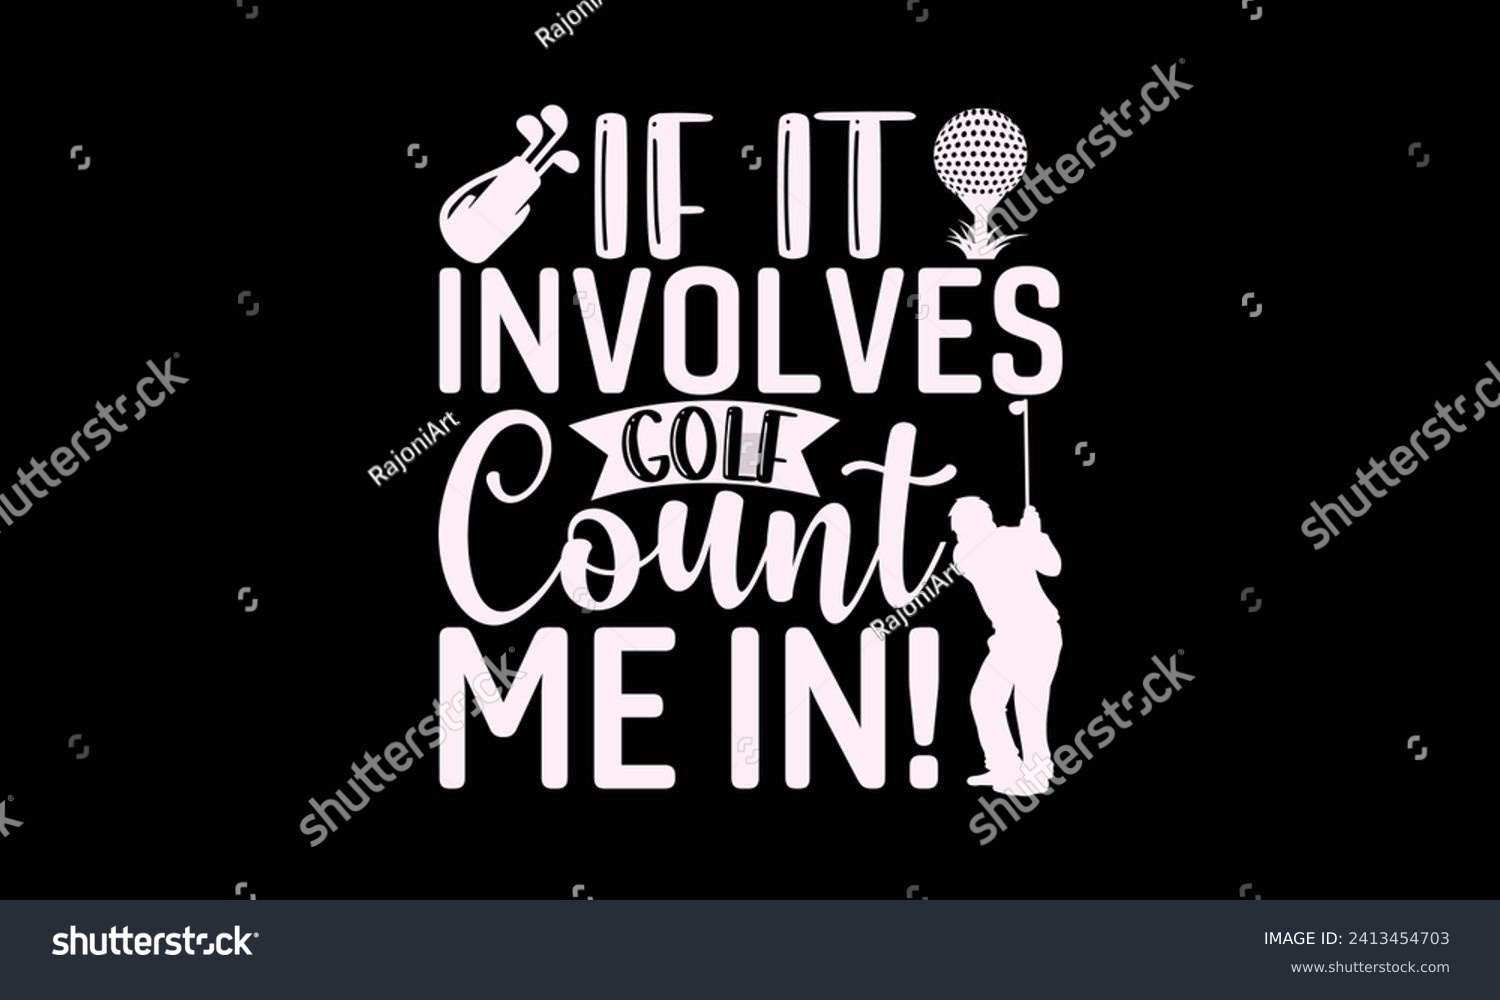 SVG of If it involves golf count me in! - Golf T Shirt Design, Handmade calligraphy vector illustration, Conceptual handwritten phrase calligraphic, Cutting Cricut and Silhouette, EPS 10 svg